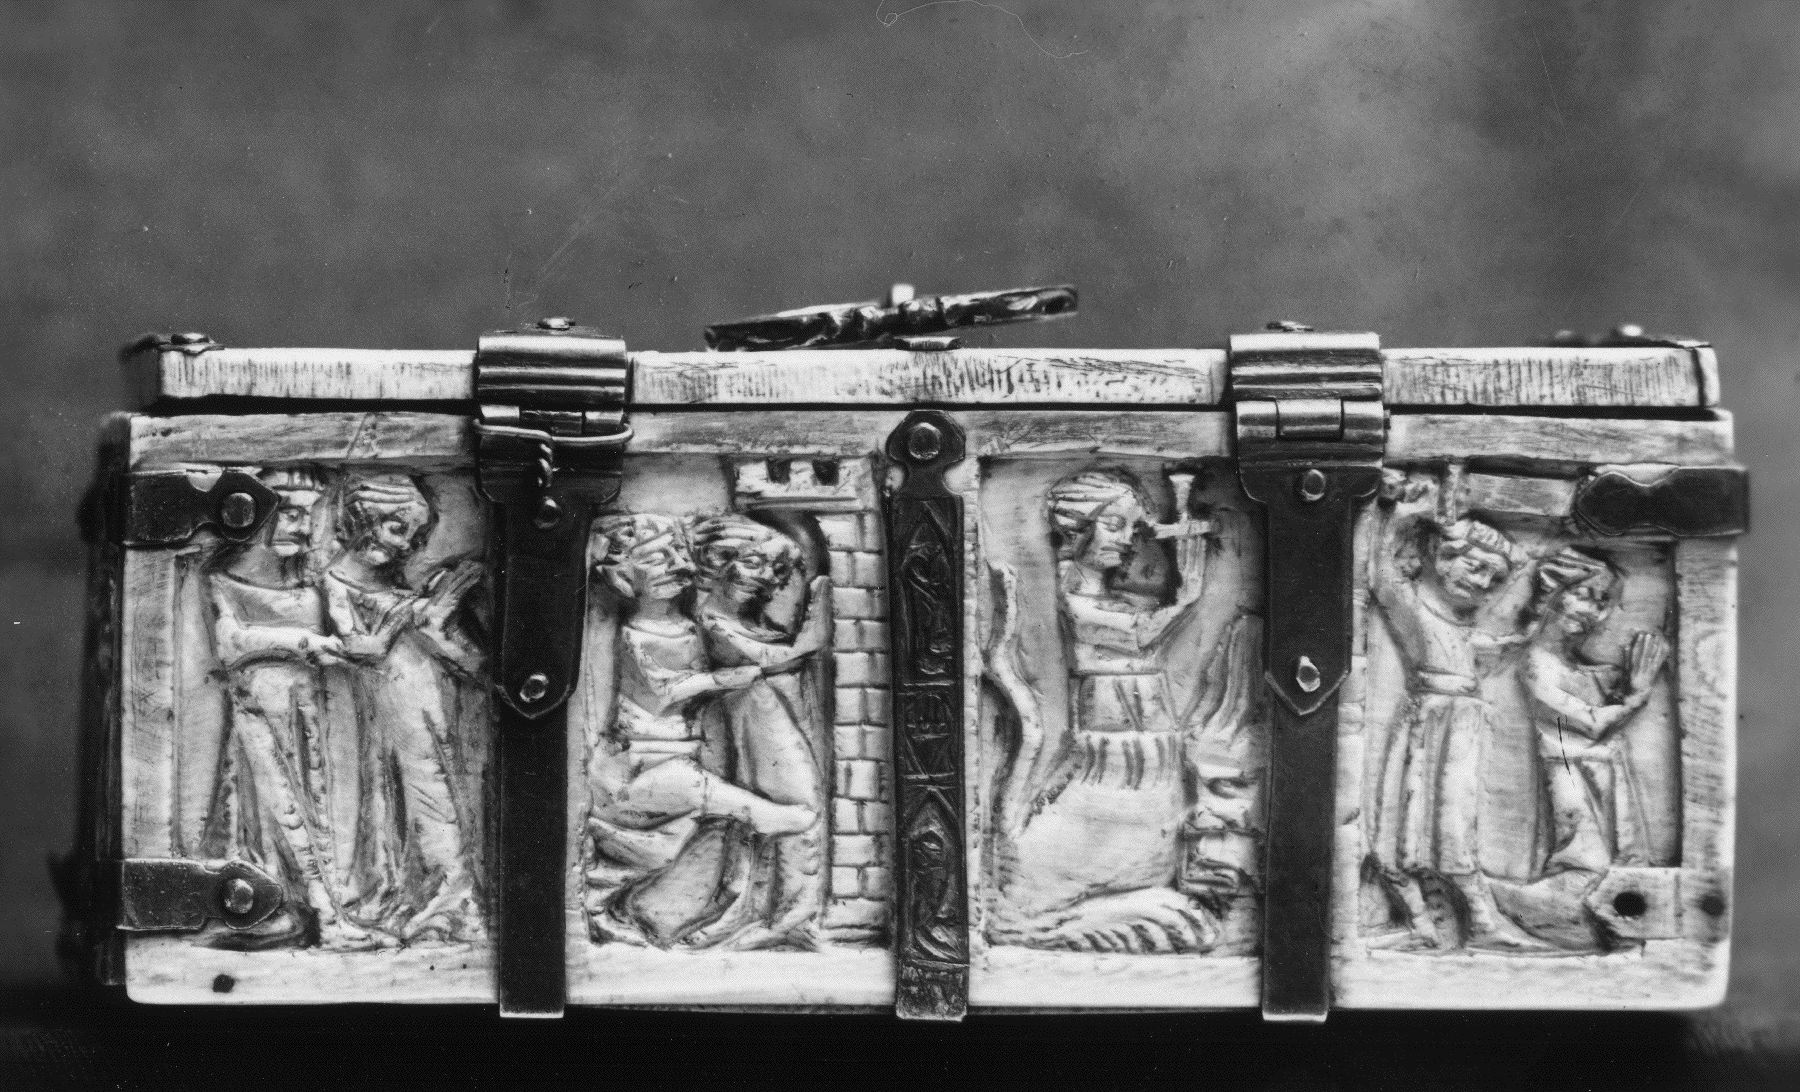 Image for Casket with Scenes from the Lives of the Virgin and Saint Margaret